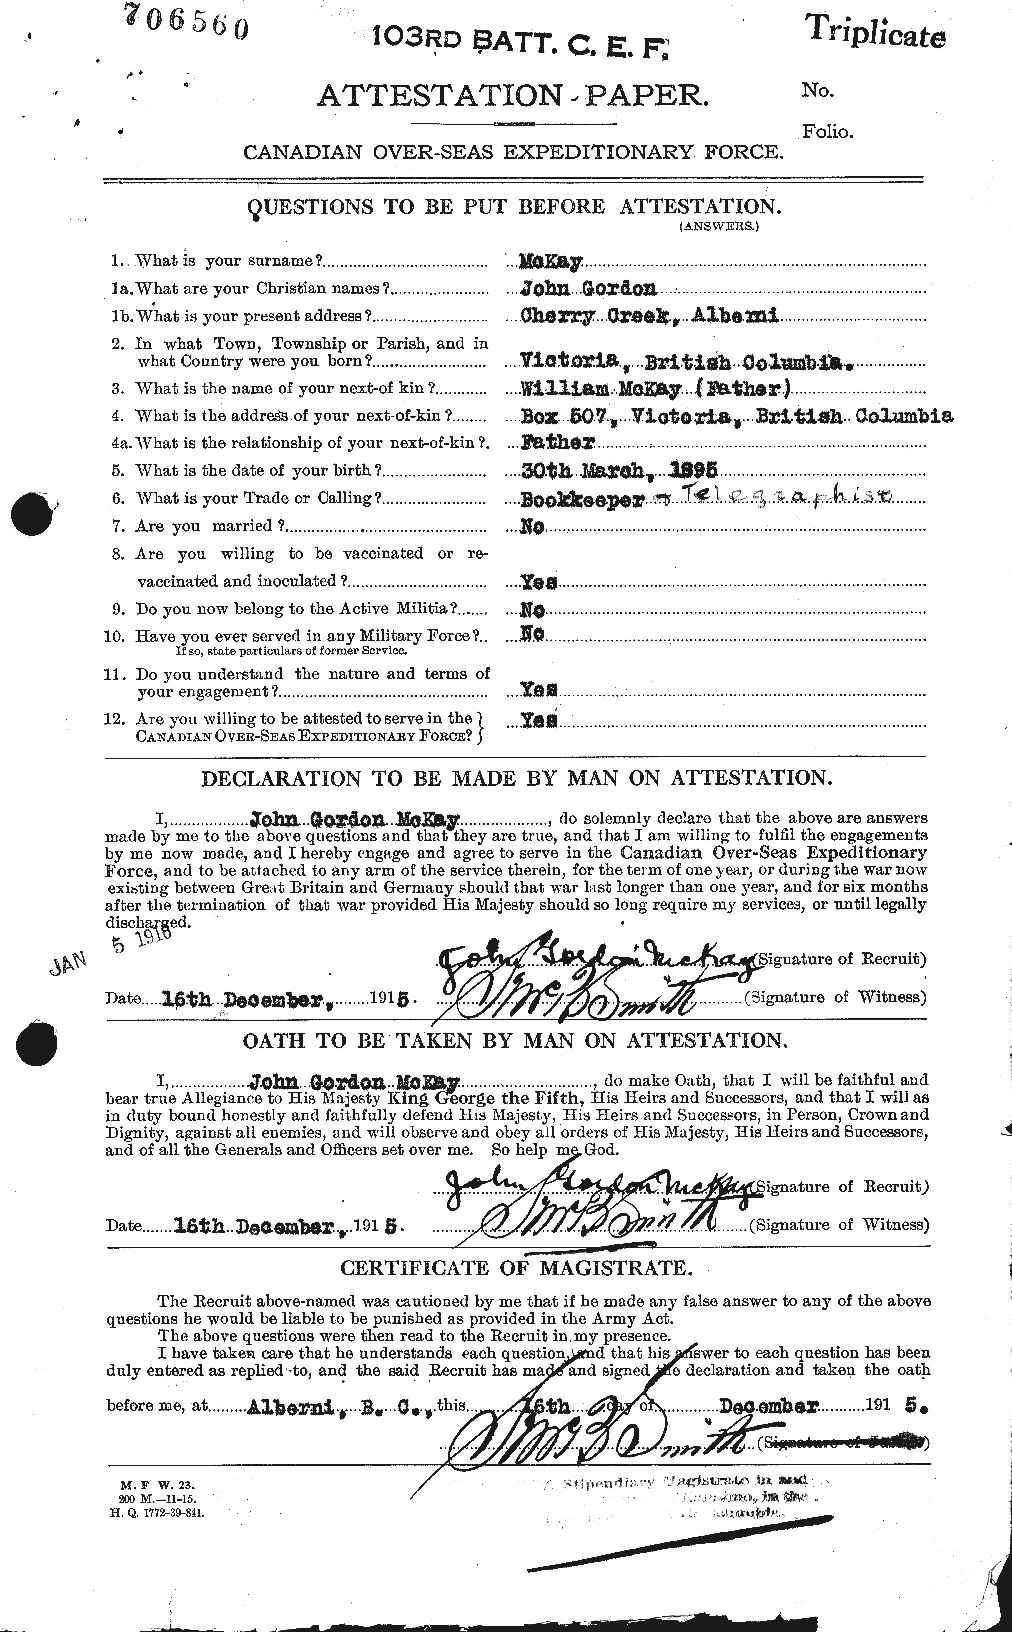 Personnel Records of the First World War - CEF 527060a